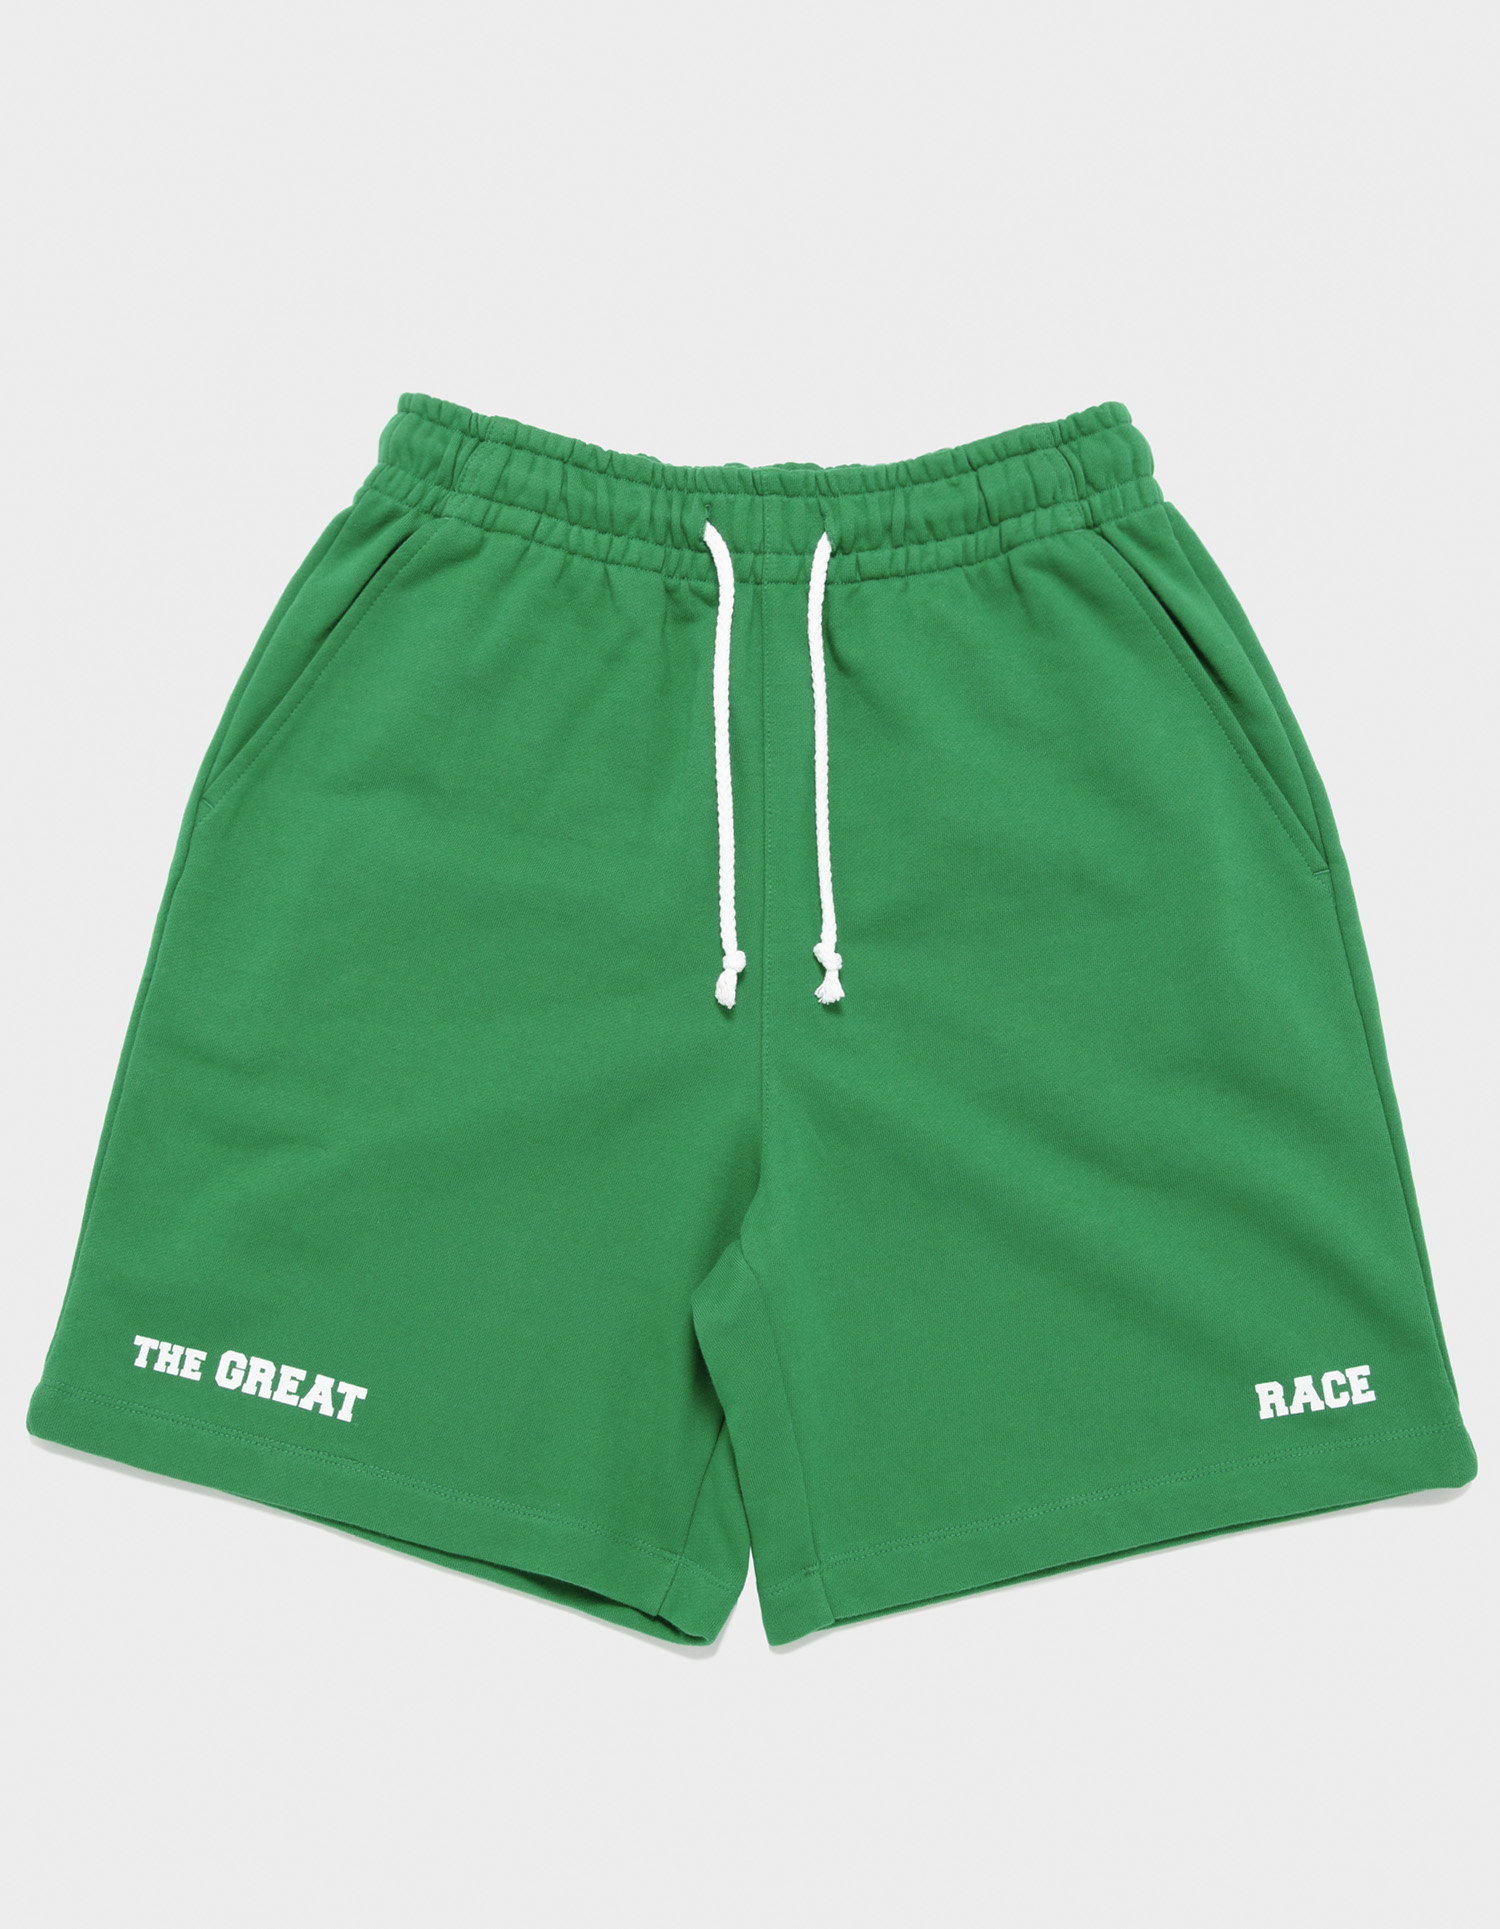 &#039;THE GREAT RACE&#039; Basketball Shorts (GREEN) - 포니테일